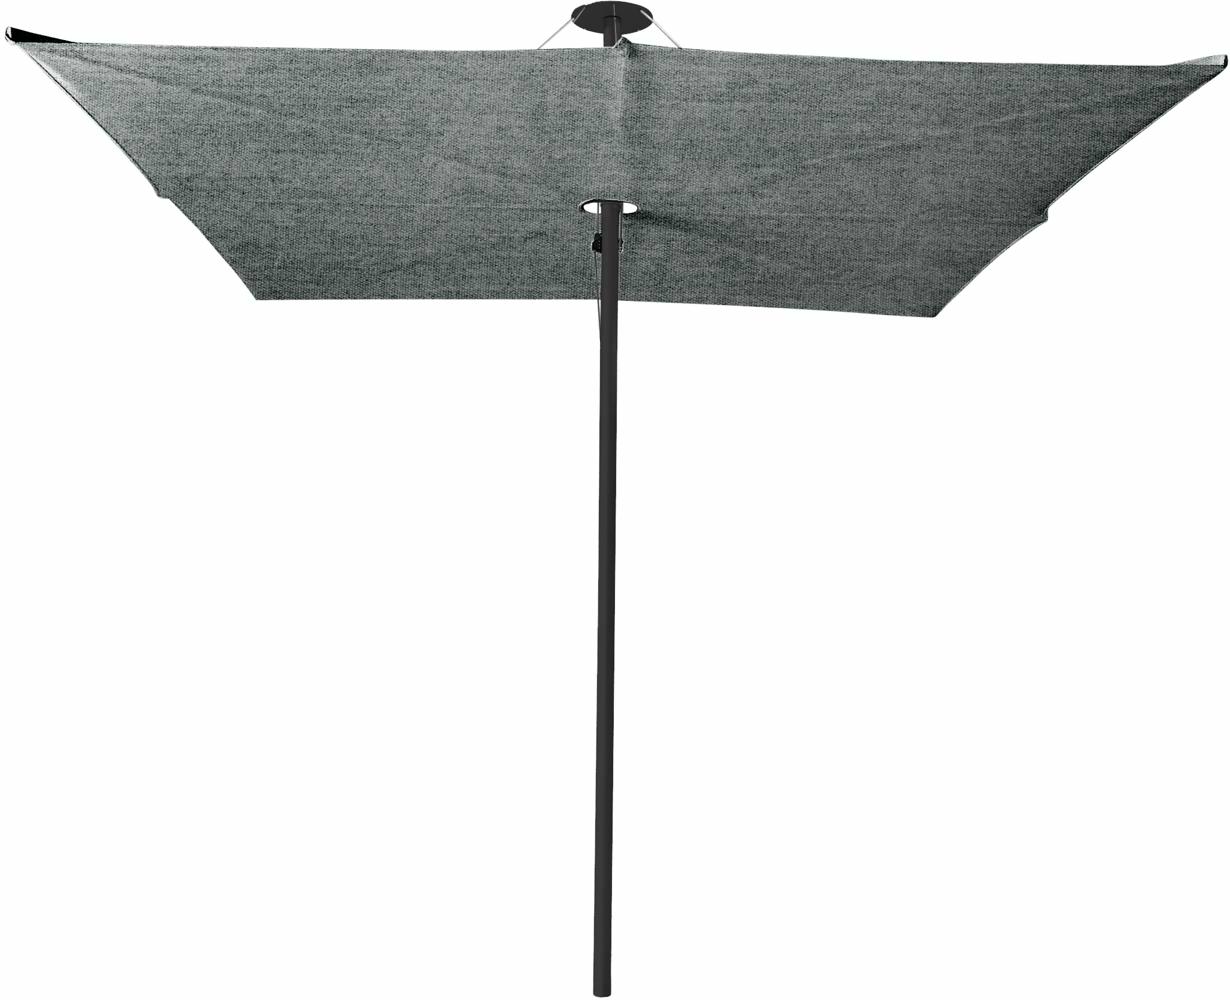 Infina center post umbrella, 2,5 m square, with frame in Dusk and Solidum Flanelle canopy. 